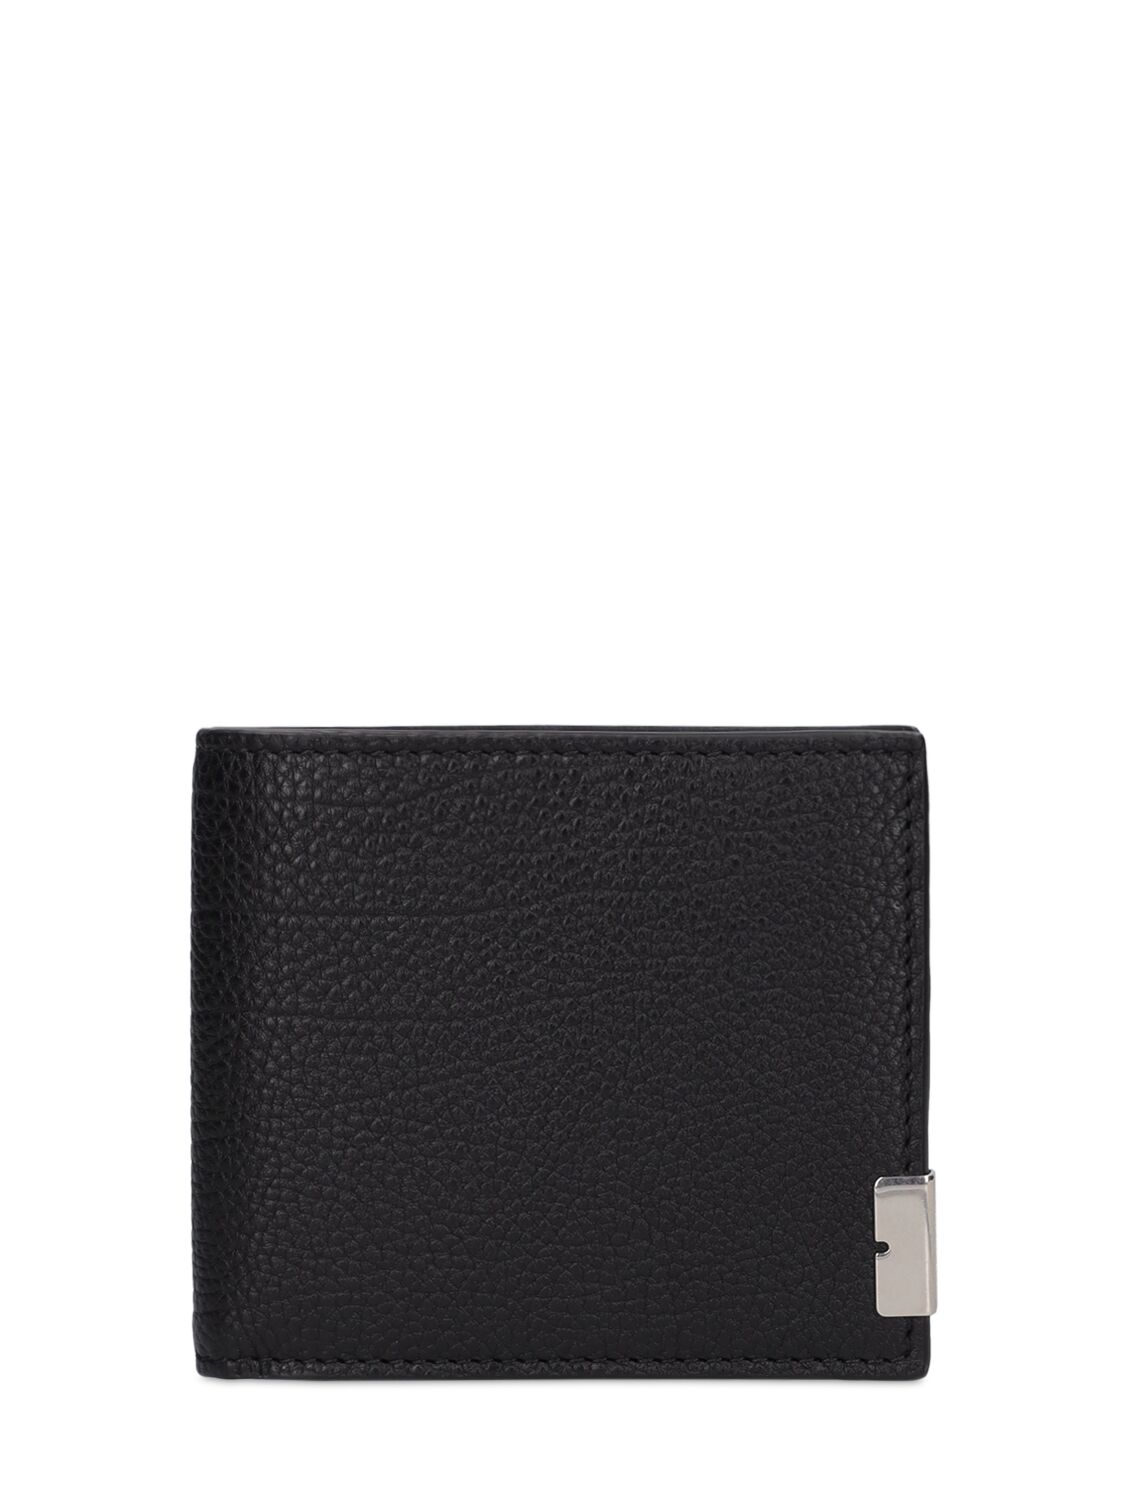 Image of Grained Leather Bifold Wallet